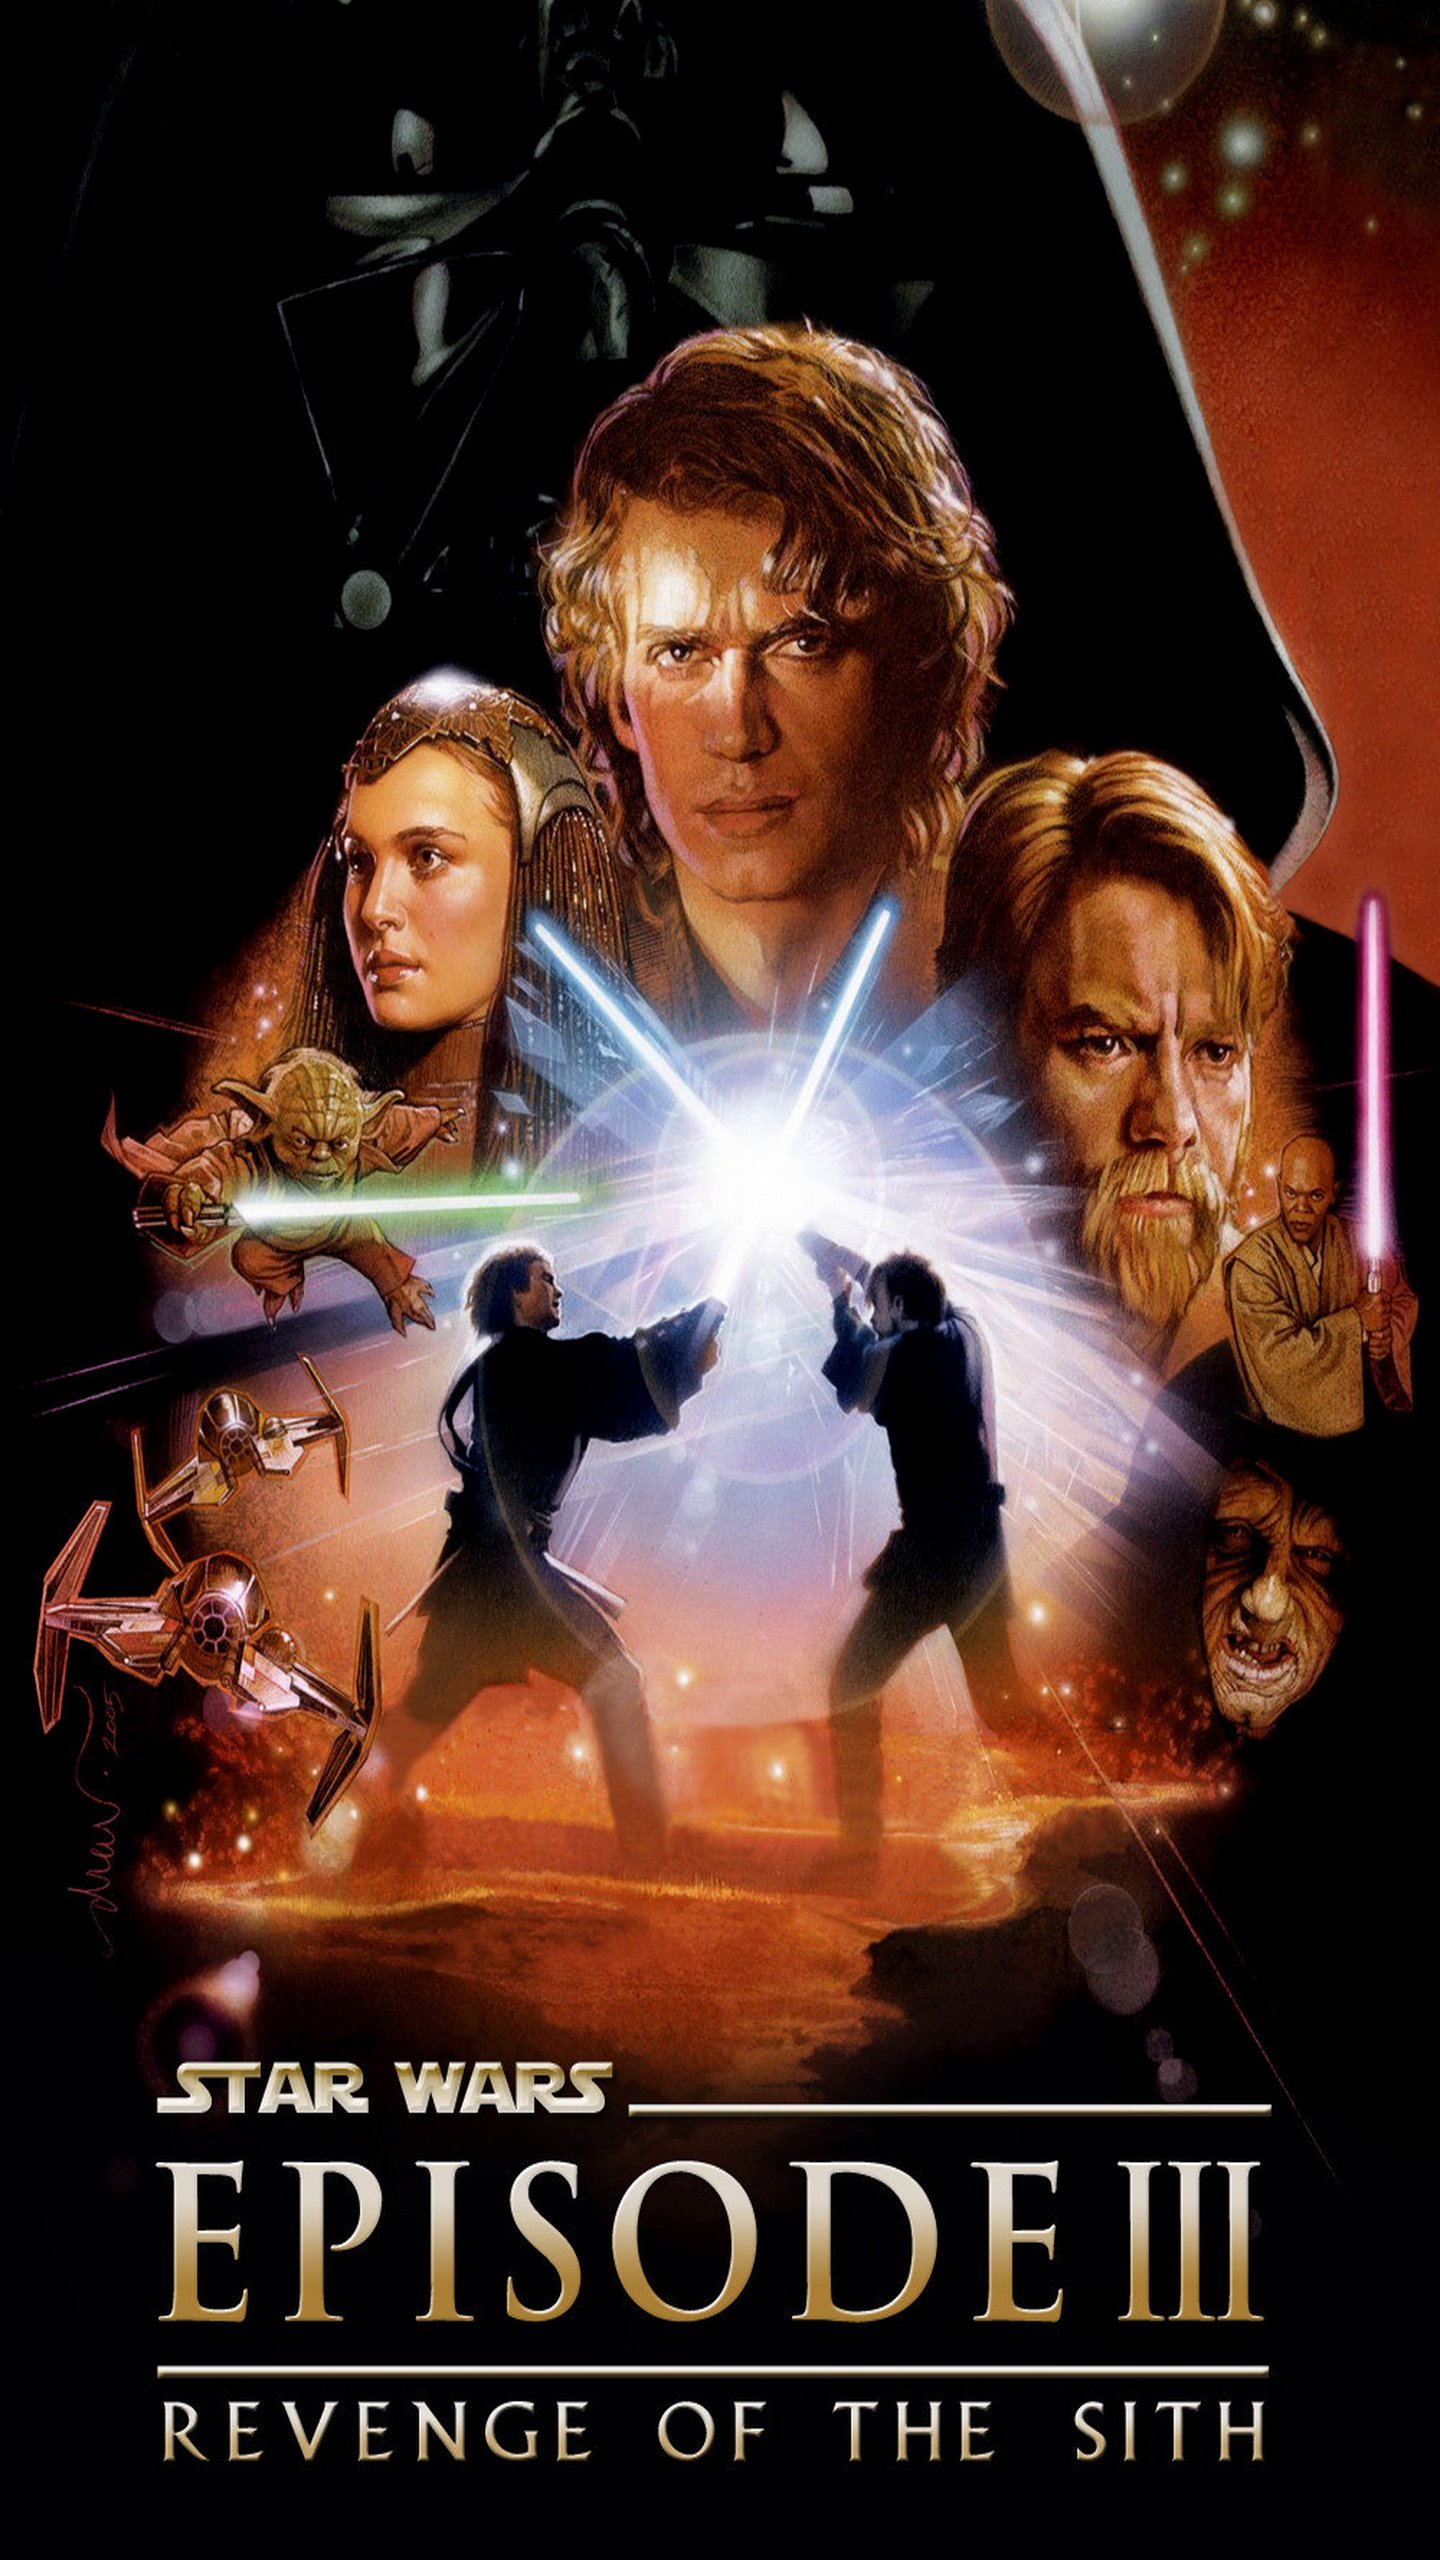 Star Wars Episode III Revenge of the Sith Galaxy Note 4 Wallpaper